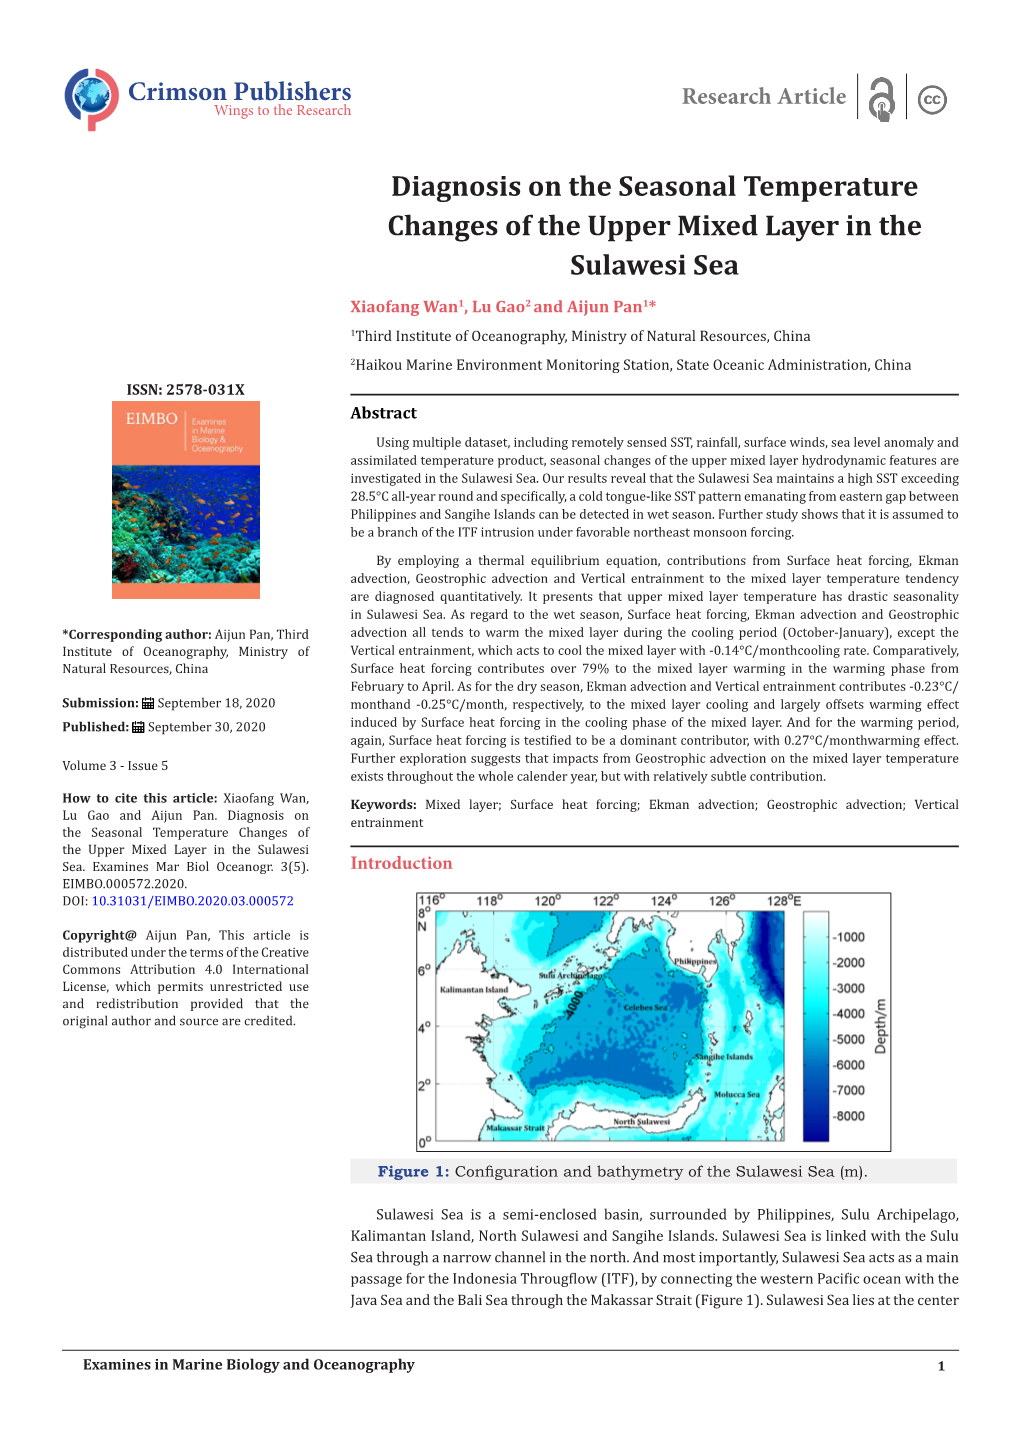 Diagnosis on the Seasonal Temperature Changes of the Upper Mixed Layer in the Sulawesi